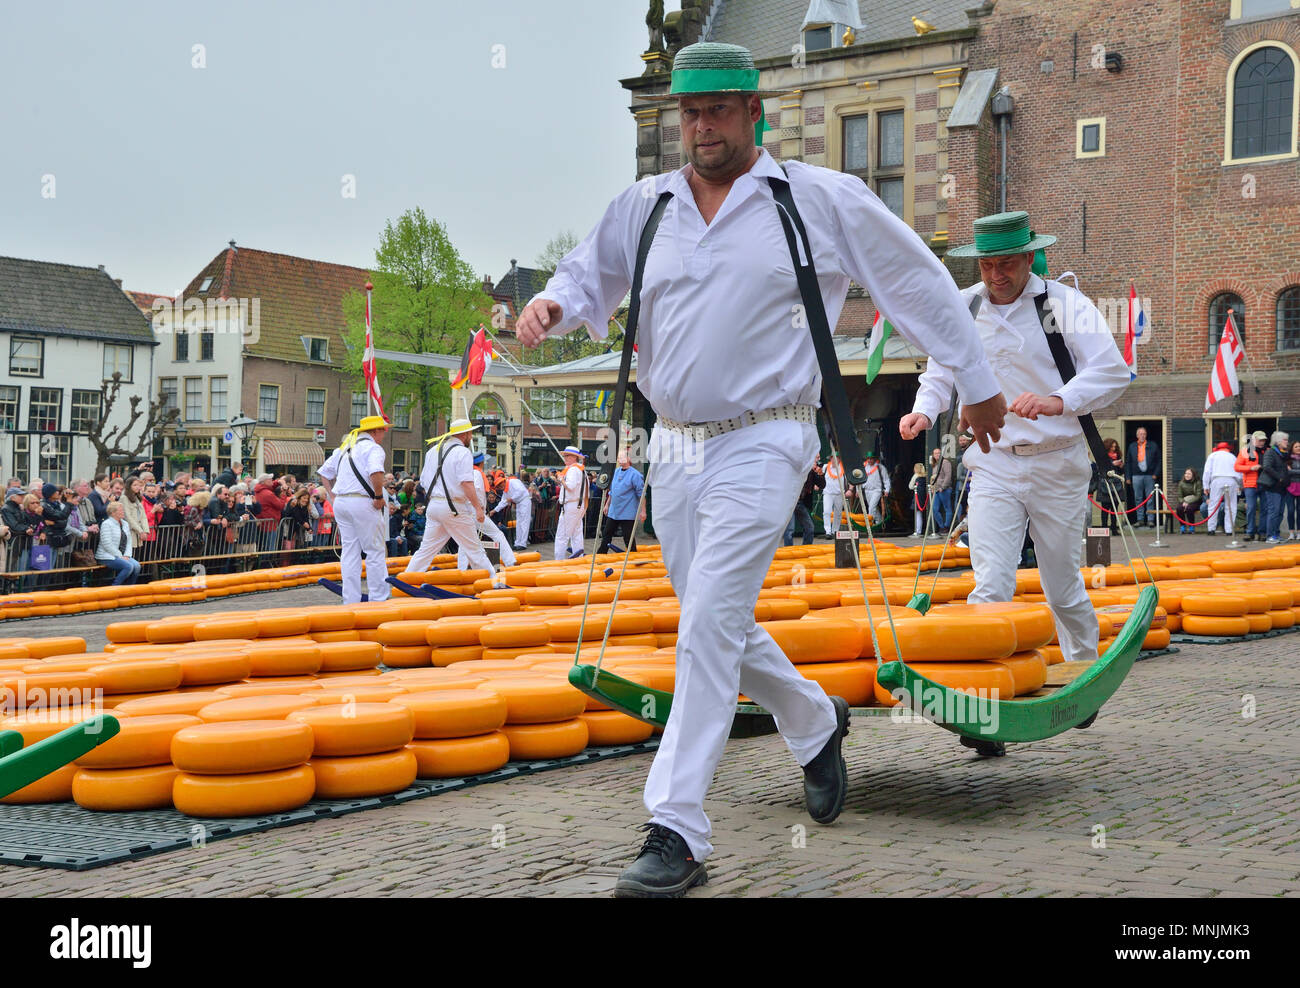 The entertaining cheese market takes place on the Waagplein in Alkmaar, Holland each week during spring and summer. Stock Photo